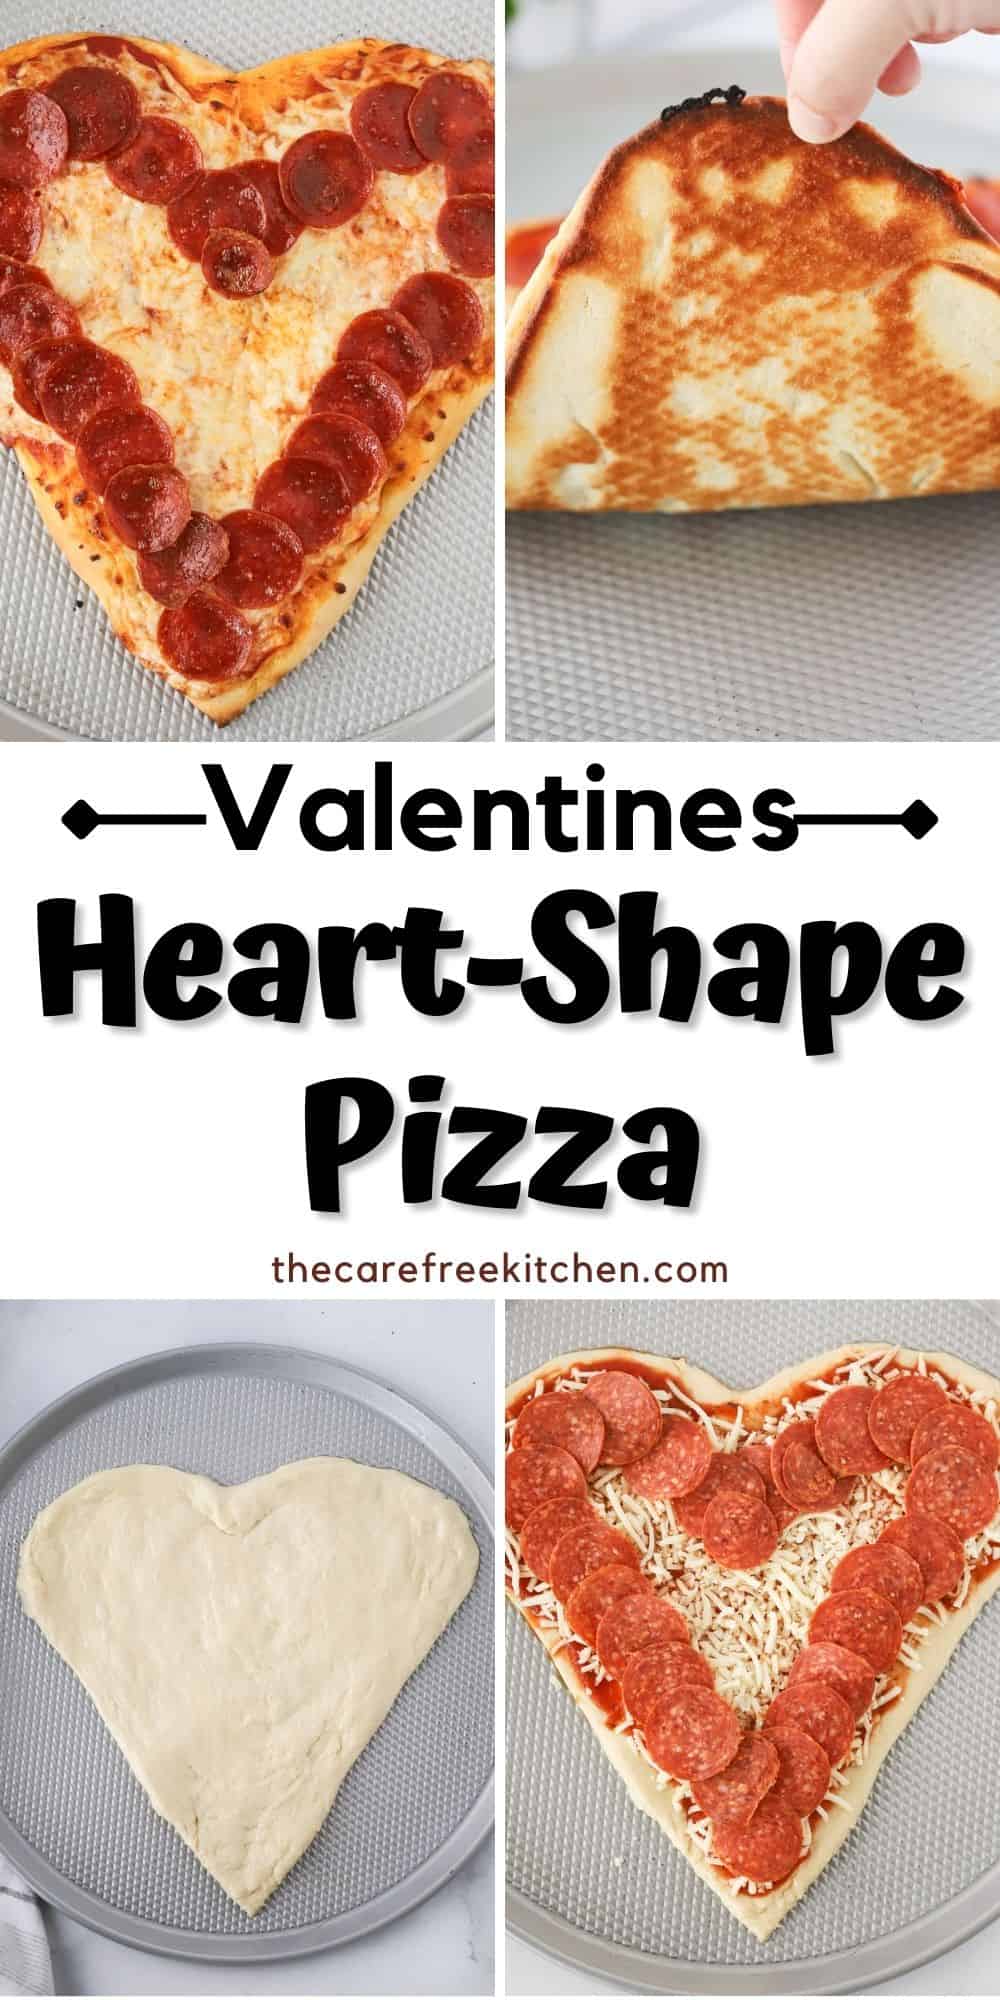 Heart Shaped Pizza - The Carefree Kitchen